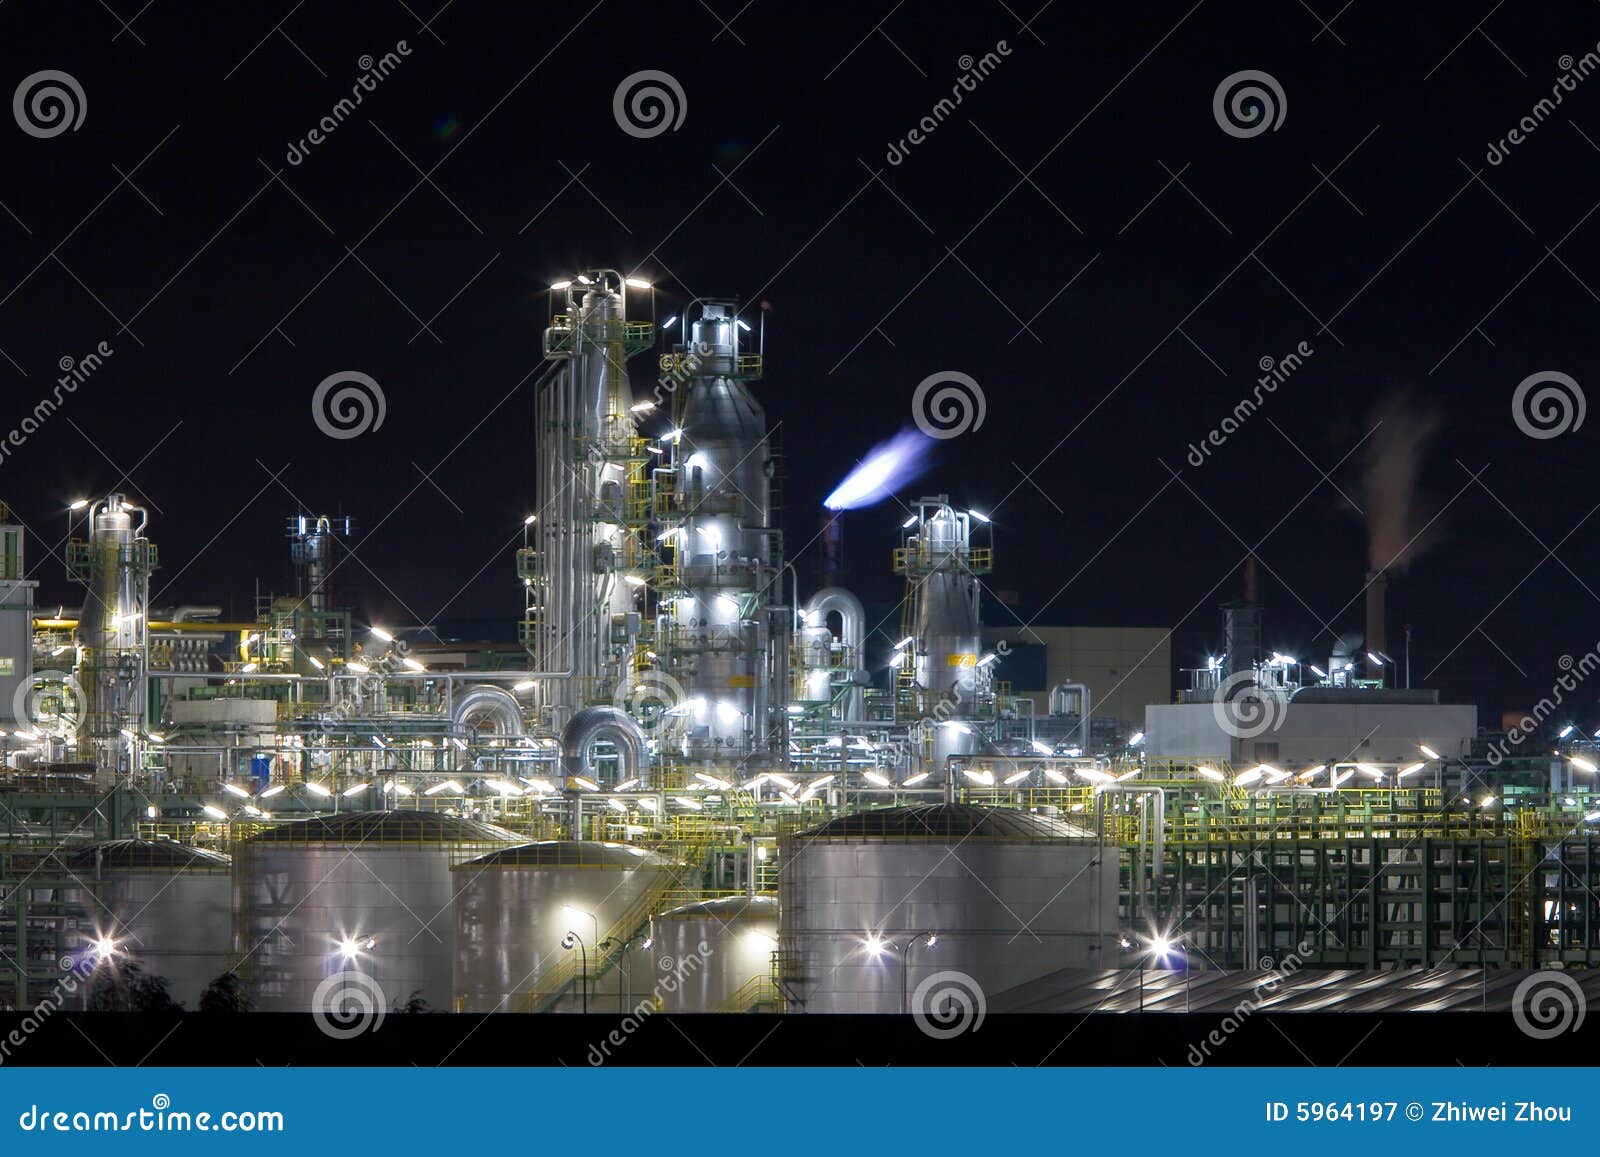 chemical plant in night